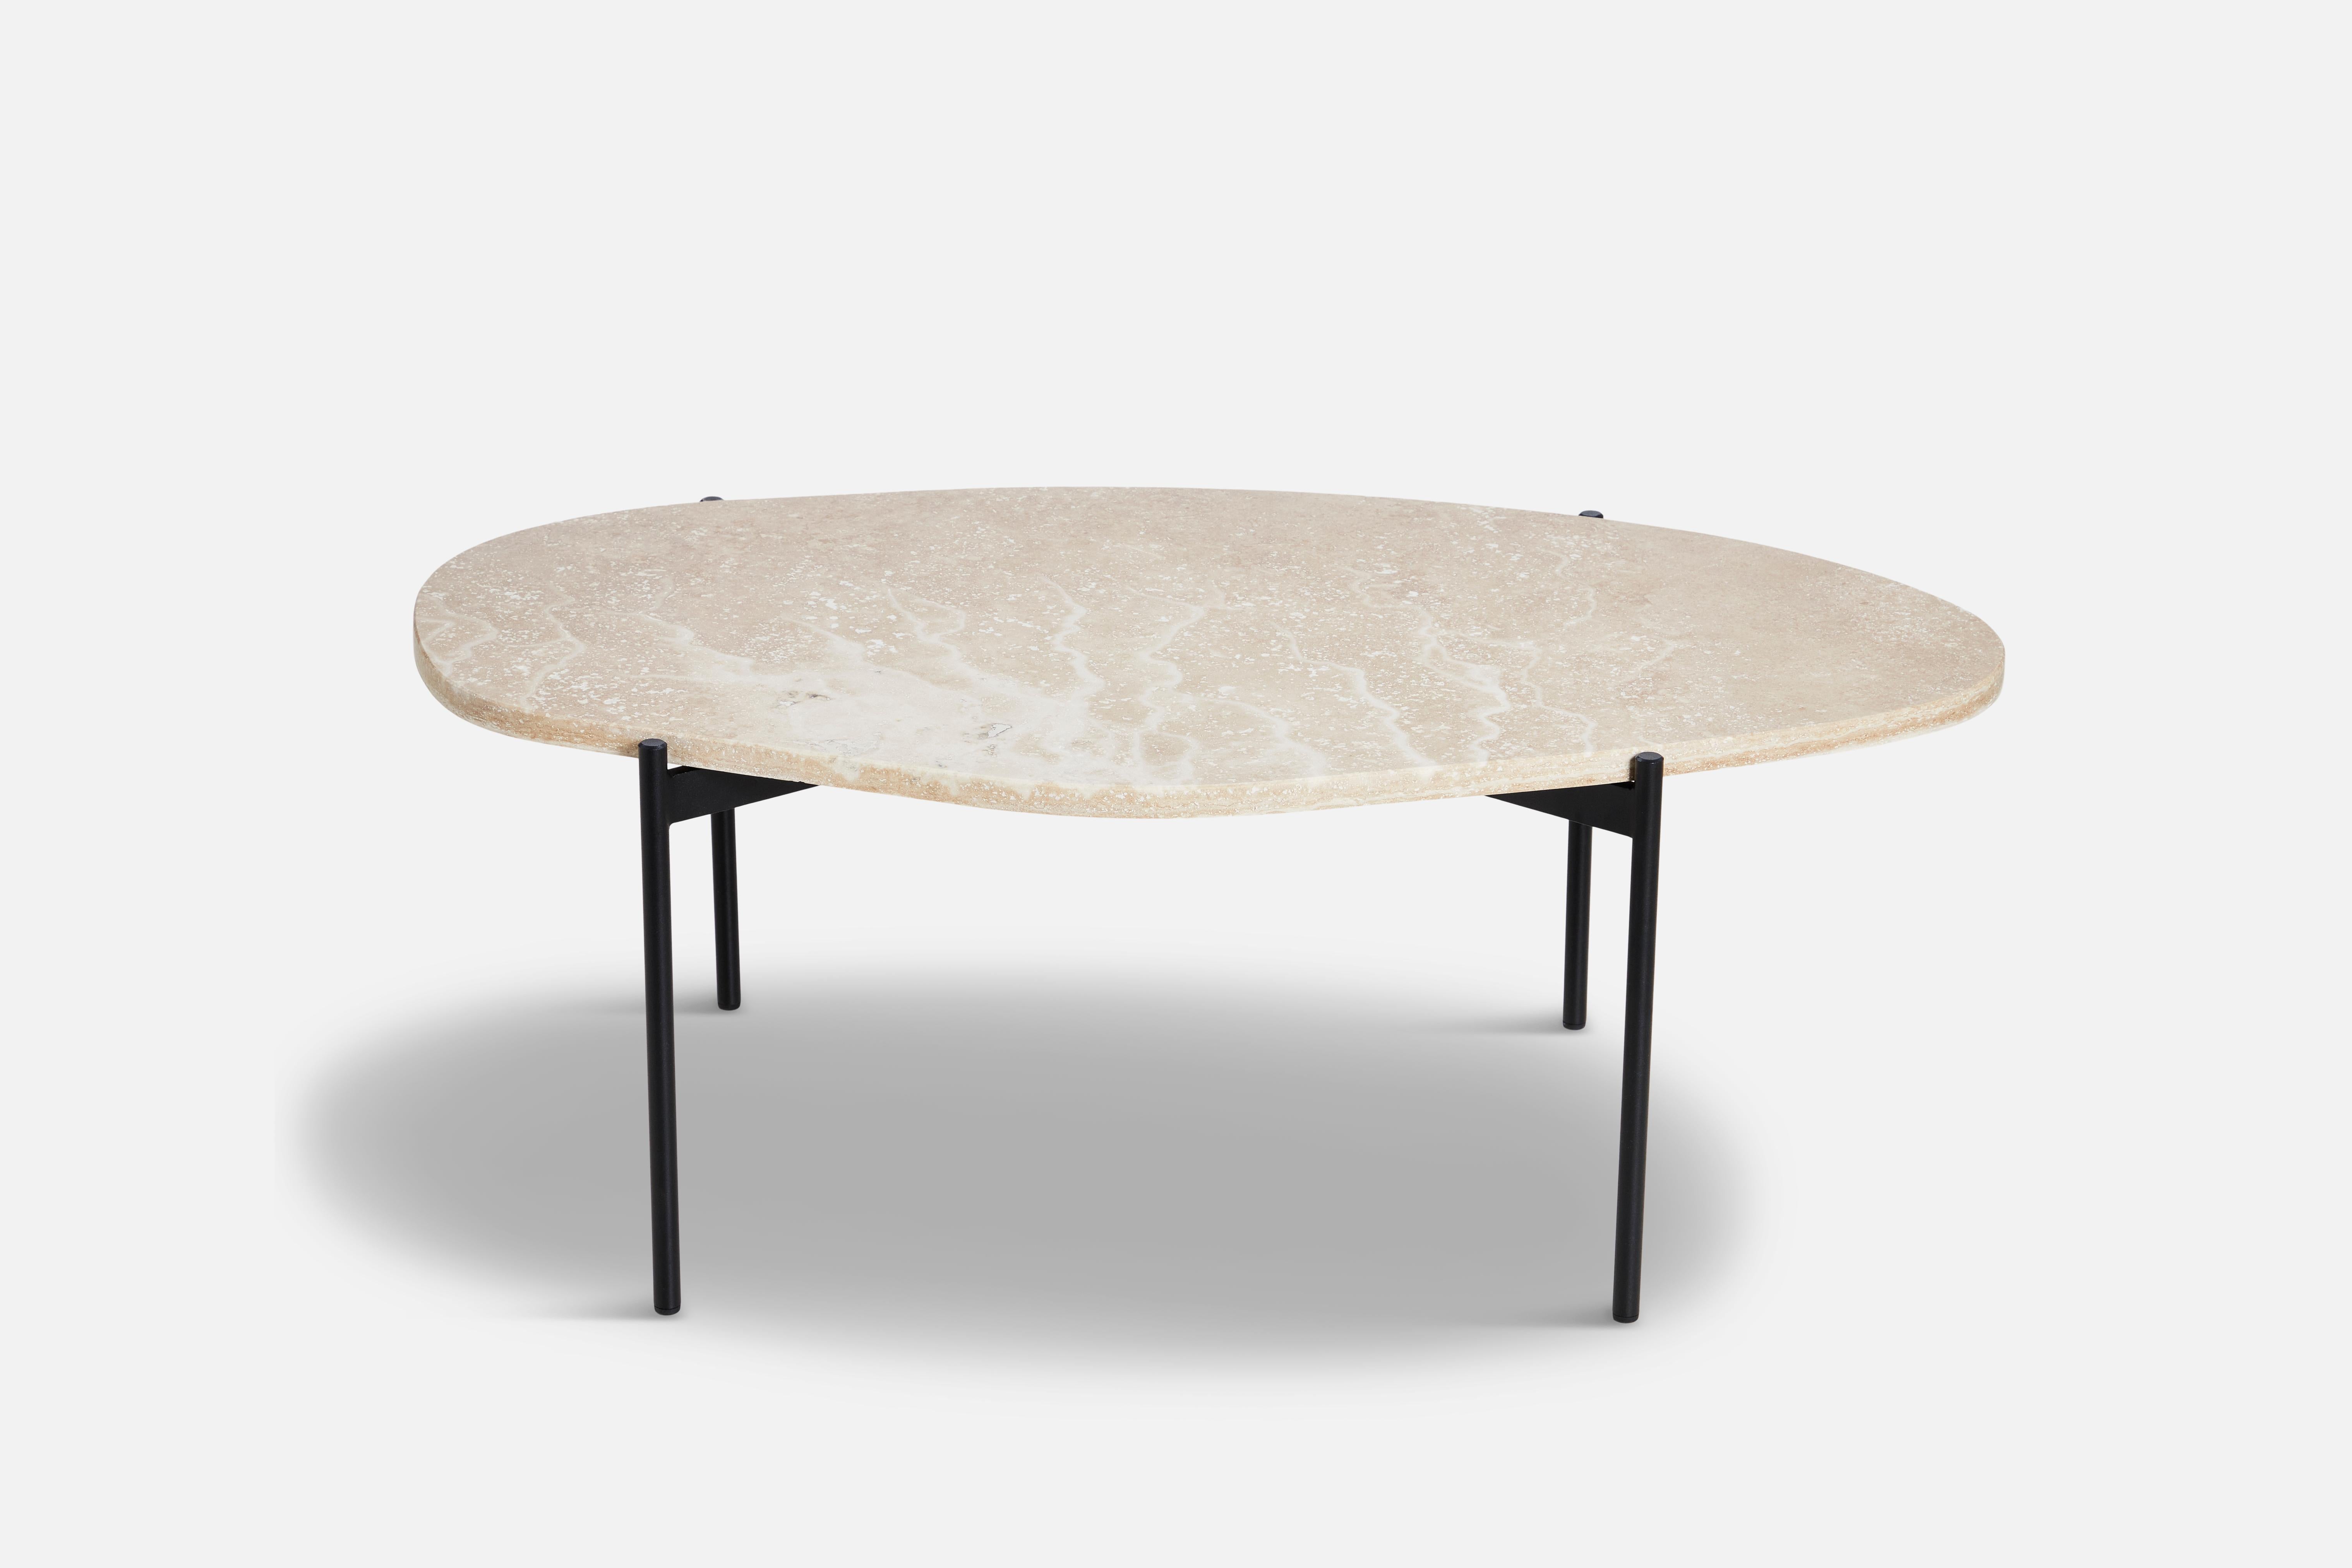 La Terra large occasional table by Agnes Morguet
Materials: Metal, Ivory Travertine
Dimensions: D 54 x W 95 x H 36 cm

The founders, Mia and Torben Koed, decided to put their 30 years of experience into a new project. It was time for a change